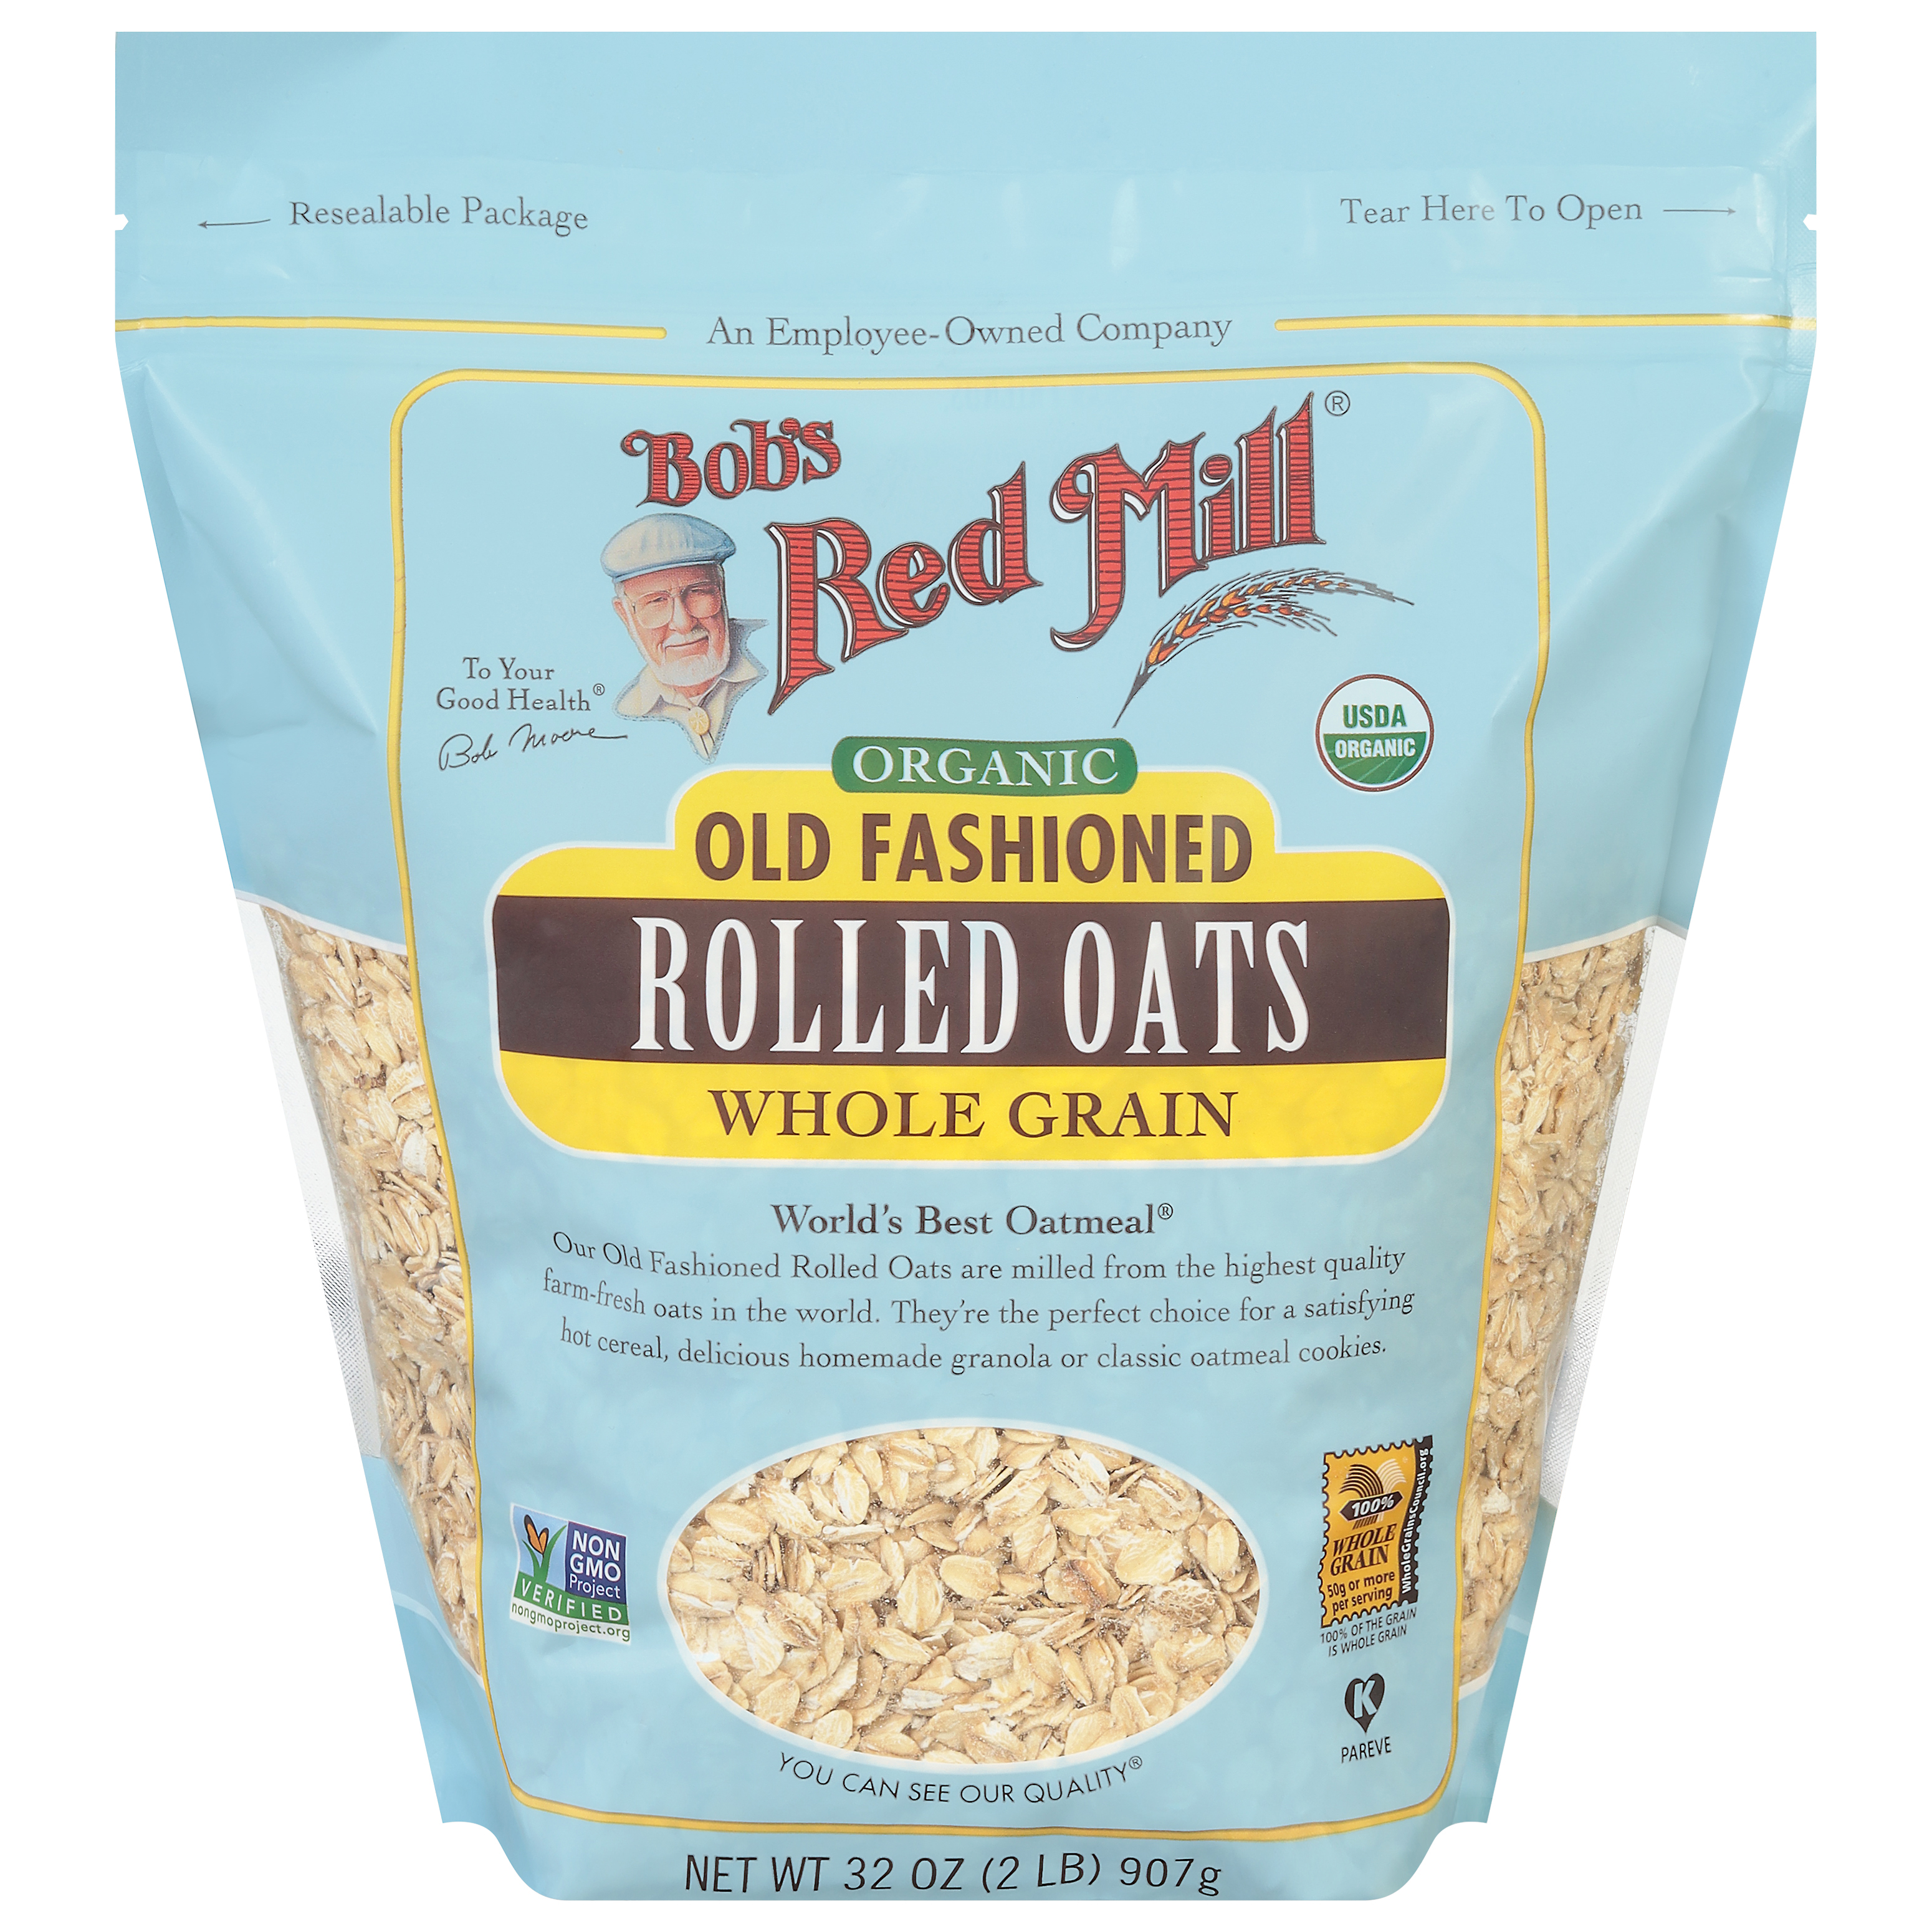 Bob's Red Mill Non-GMO Organic Old Fashioned Rolled Oats 32 oz Bag - image 1 of 5